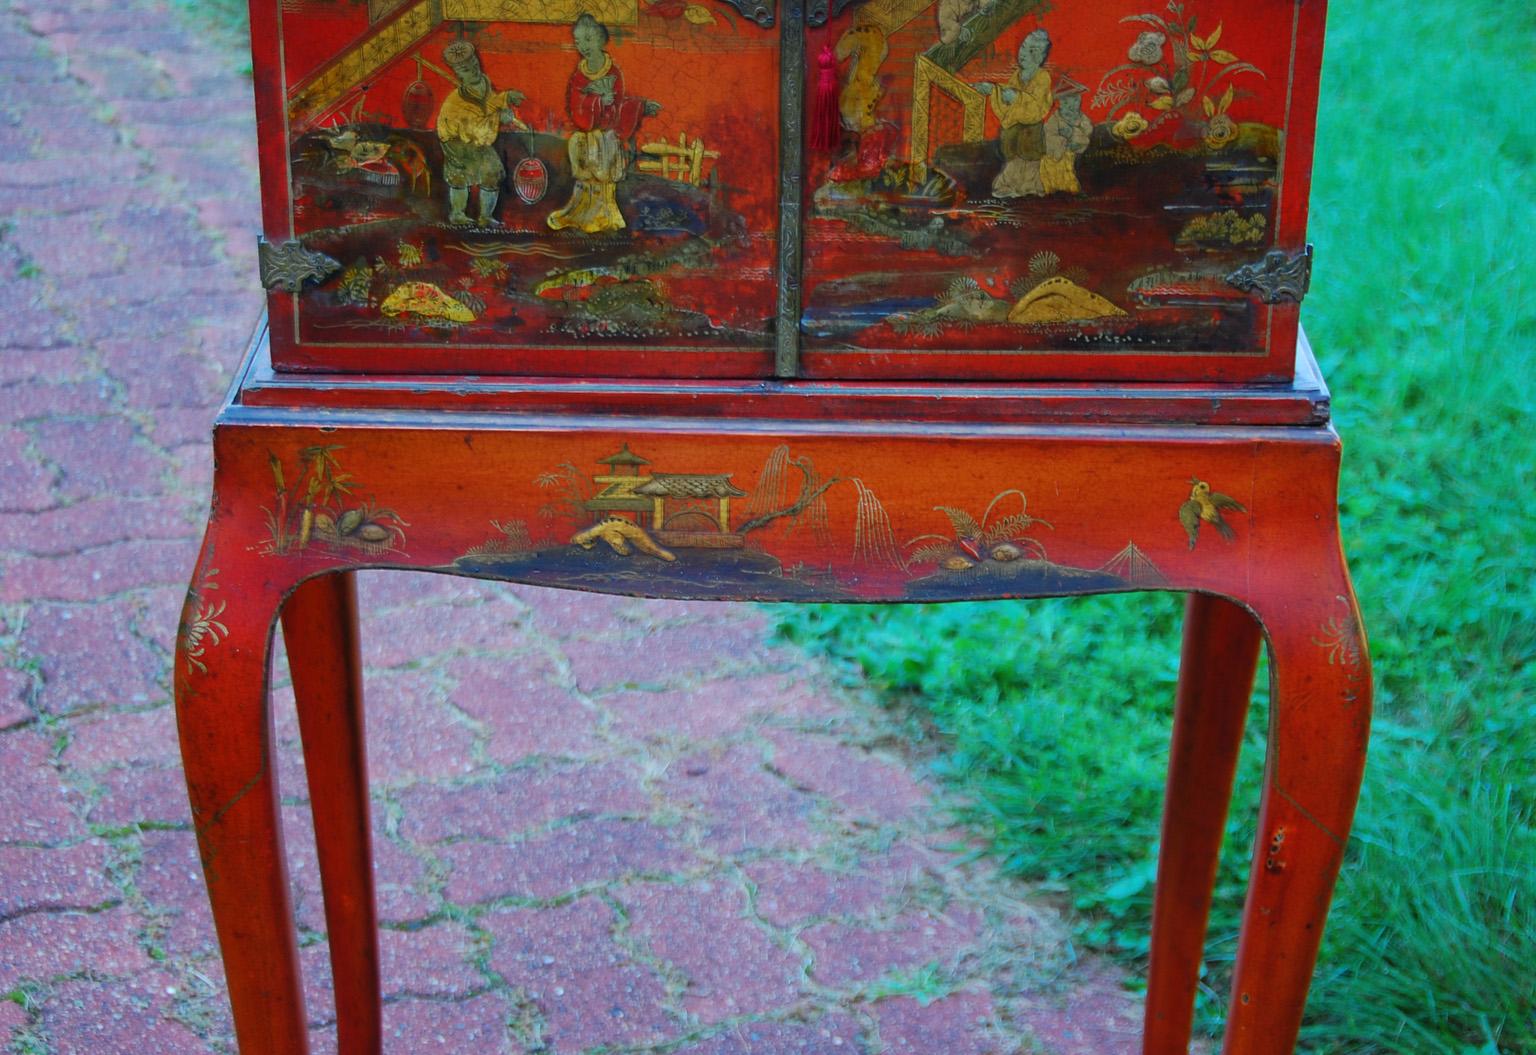 English late 19th century red chinoiserie lacquered cabinet on original cabriole leg stand. The two cabinet doors open to reveal eight black chinoiserie decorated drawers. This diminutive cabinet retains all of its original brass engraved fittings